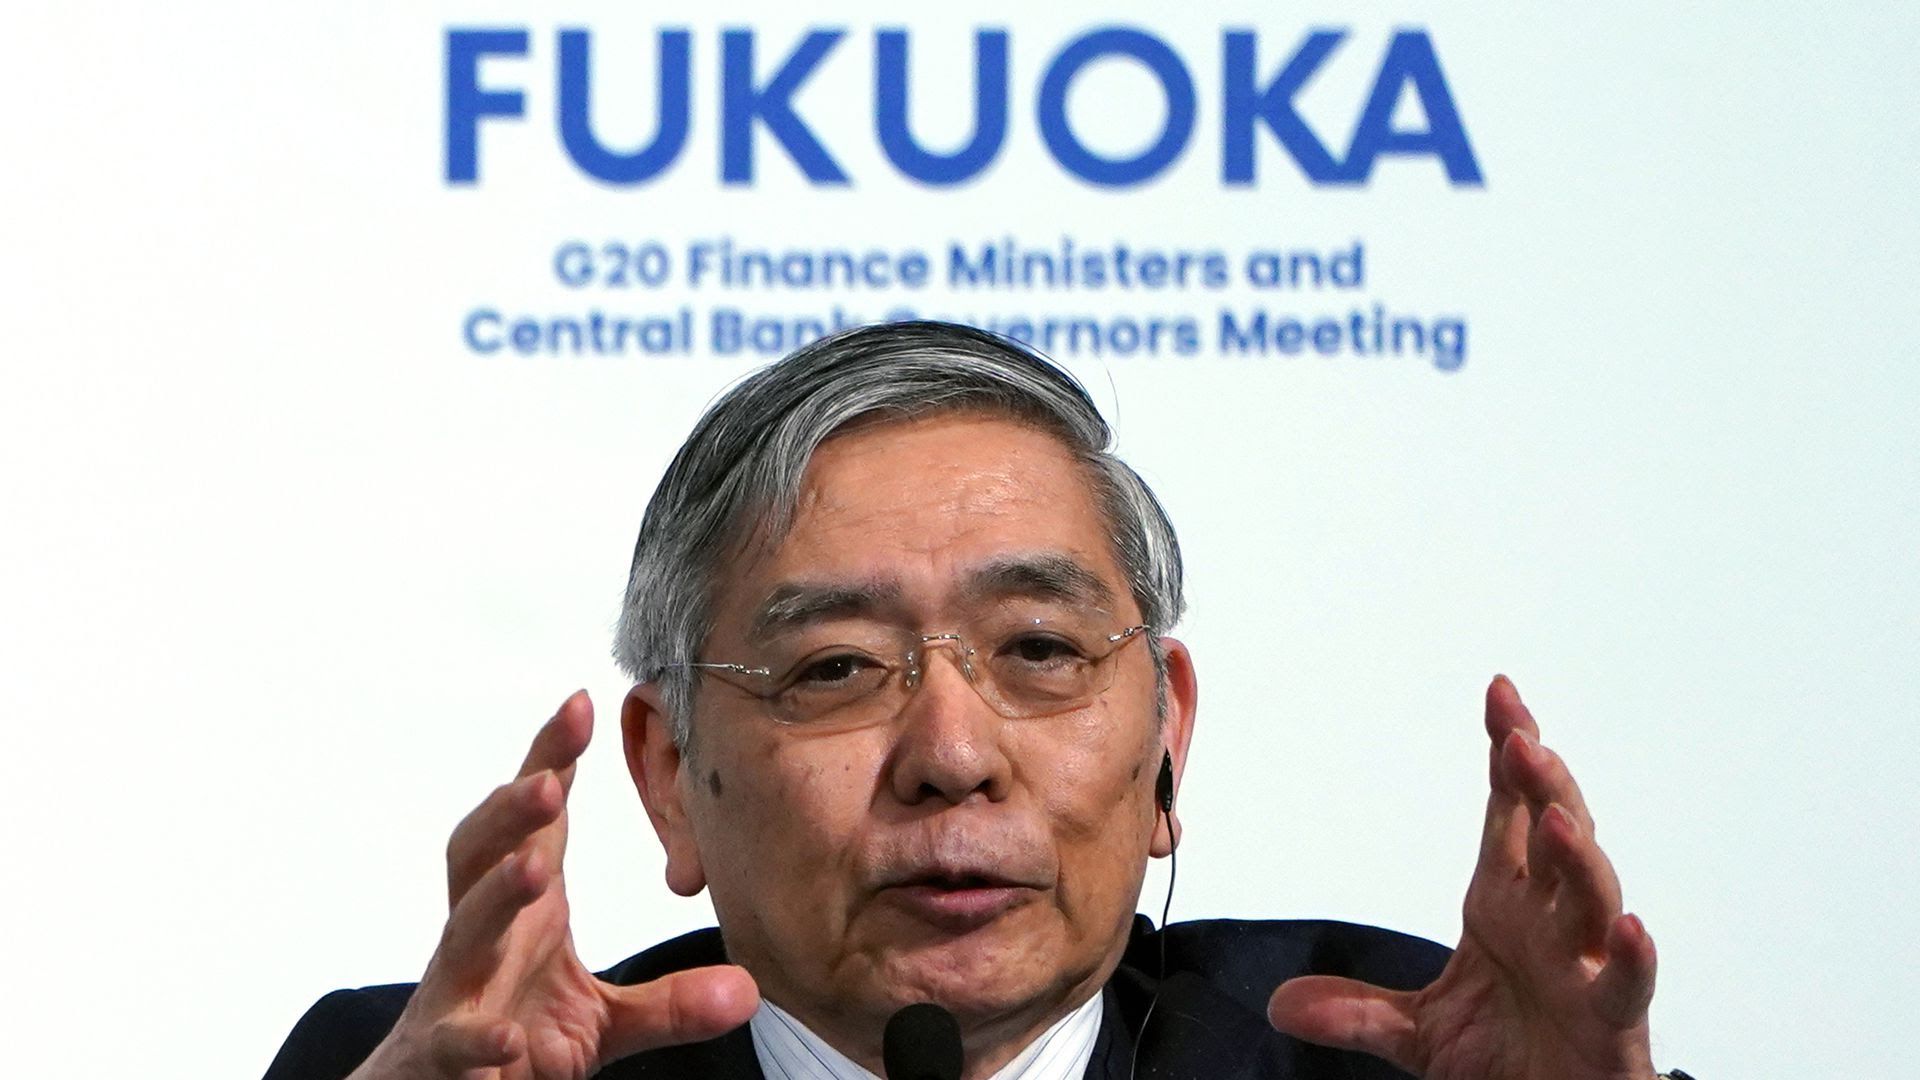 Bank of Japan governor Haruhiko Kuroda at the G20 finance ministers and central bank governors meeting in Japan. Photo: Eugene Hoshiko/AFP/Getty Images